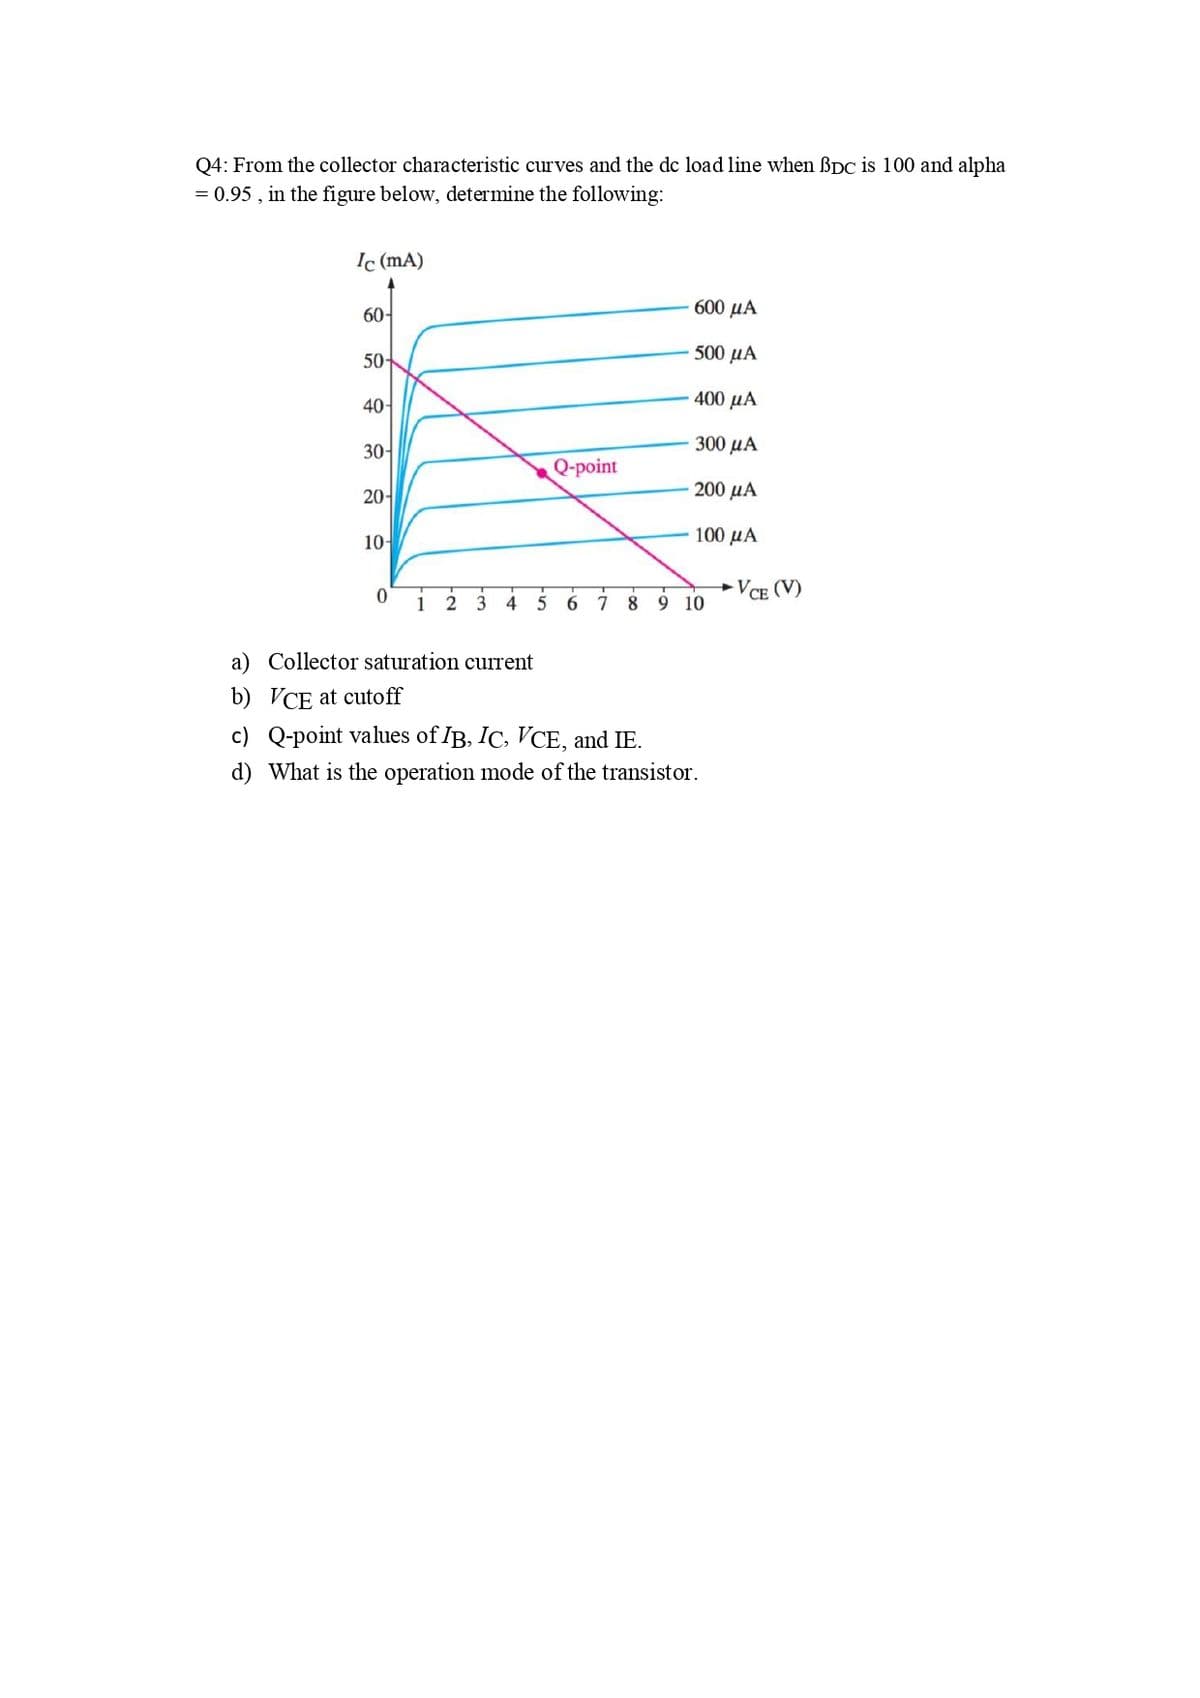 Q4: From the collector characteristic curves and the dc load line when ßDc is 100 and alpha
= 0.95 , in the figure below, determine the following:
Ic (mA)
60-
600 μΑ
500 µA
50-
400 µA
40-
30-
300 µA
Q-point
20-
200 µA
10-
100 μΑ
VCE (V)
1
2
3
4
6.
7 8 9 10
a) Collector saturation current
b) VCE at cutoff
c) Q-point values of IB, IC, VCE, and IE.
d) What is the operation mode of the transistor.
